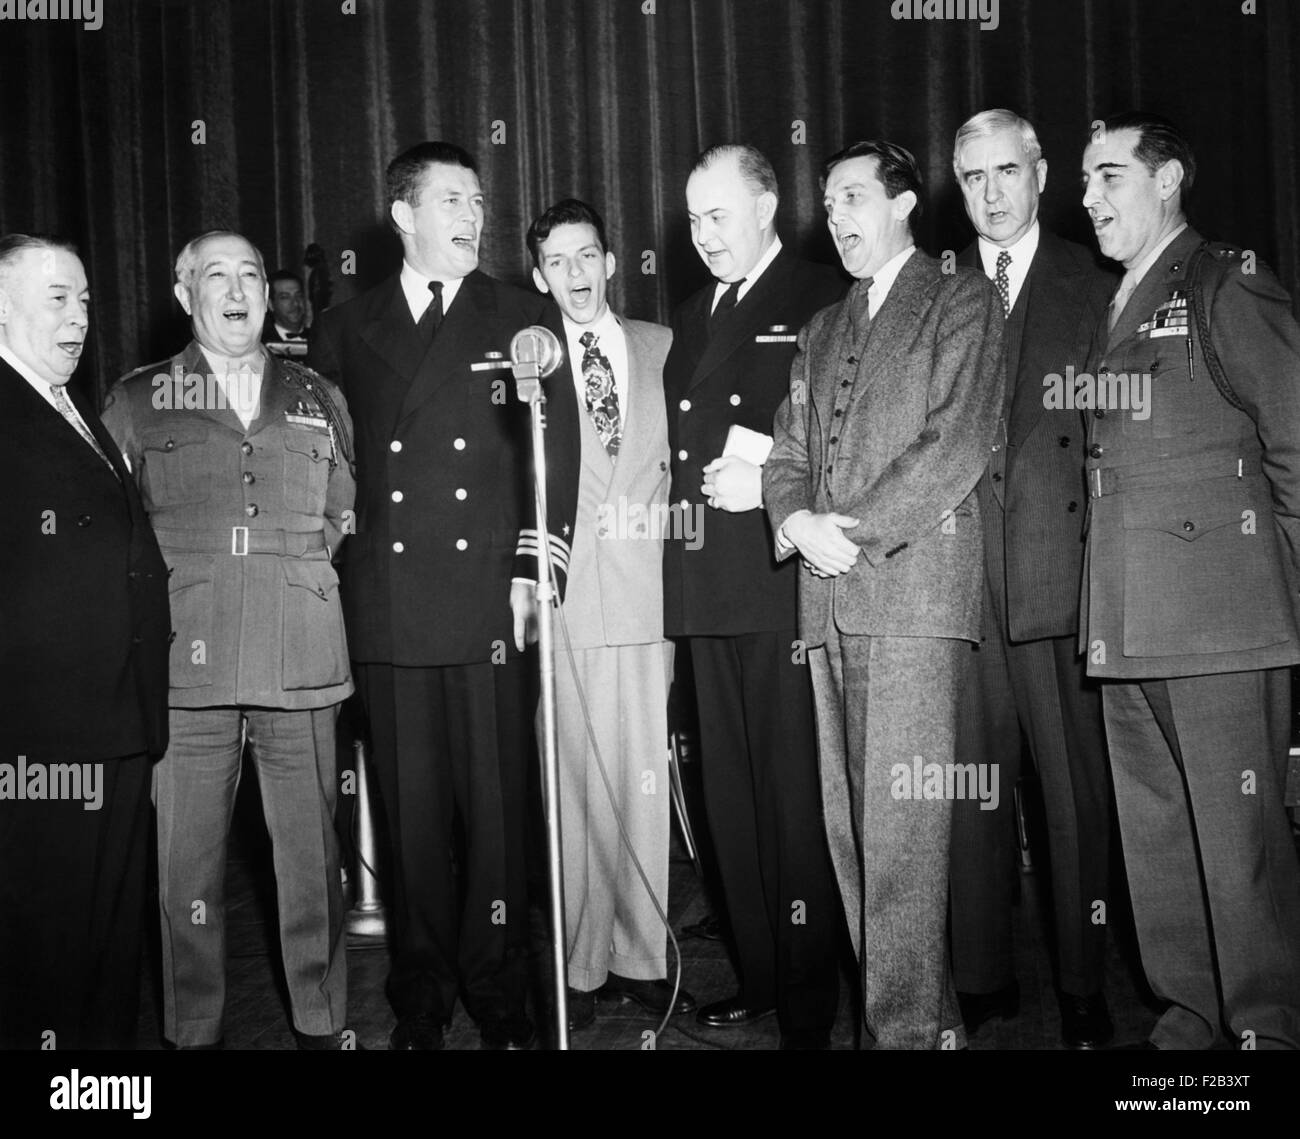 An all star octet entertains visiting editors and publishers at the Banshees' Luncheon. April 25, 1944, Grand Ballroom of the Waldorf Astoria Hotel, NYC. L-R: George McManus, cartoonist; Brig. Gen. Robert Denig, USMC Public Relations; Gene Tunney, Frank 'The Voice' Sinatra; Capt. Leland  Lovett, USN Public Relations; George Healy OWI, Chief, Domestic Div.; Jesse Jones, Dir. RFC; and Brig. Gen. Jerry Thomas, USMC. The Luncheon was given on the occasion of the opening of the 58th Annual Convention of the American Newspaper Publishers Assn. - (CSU 2015 5 154) Stock Photo